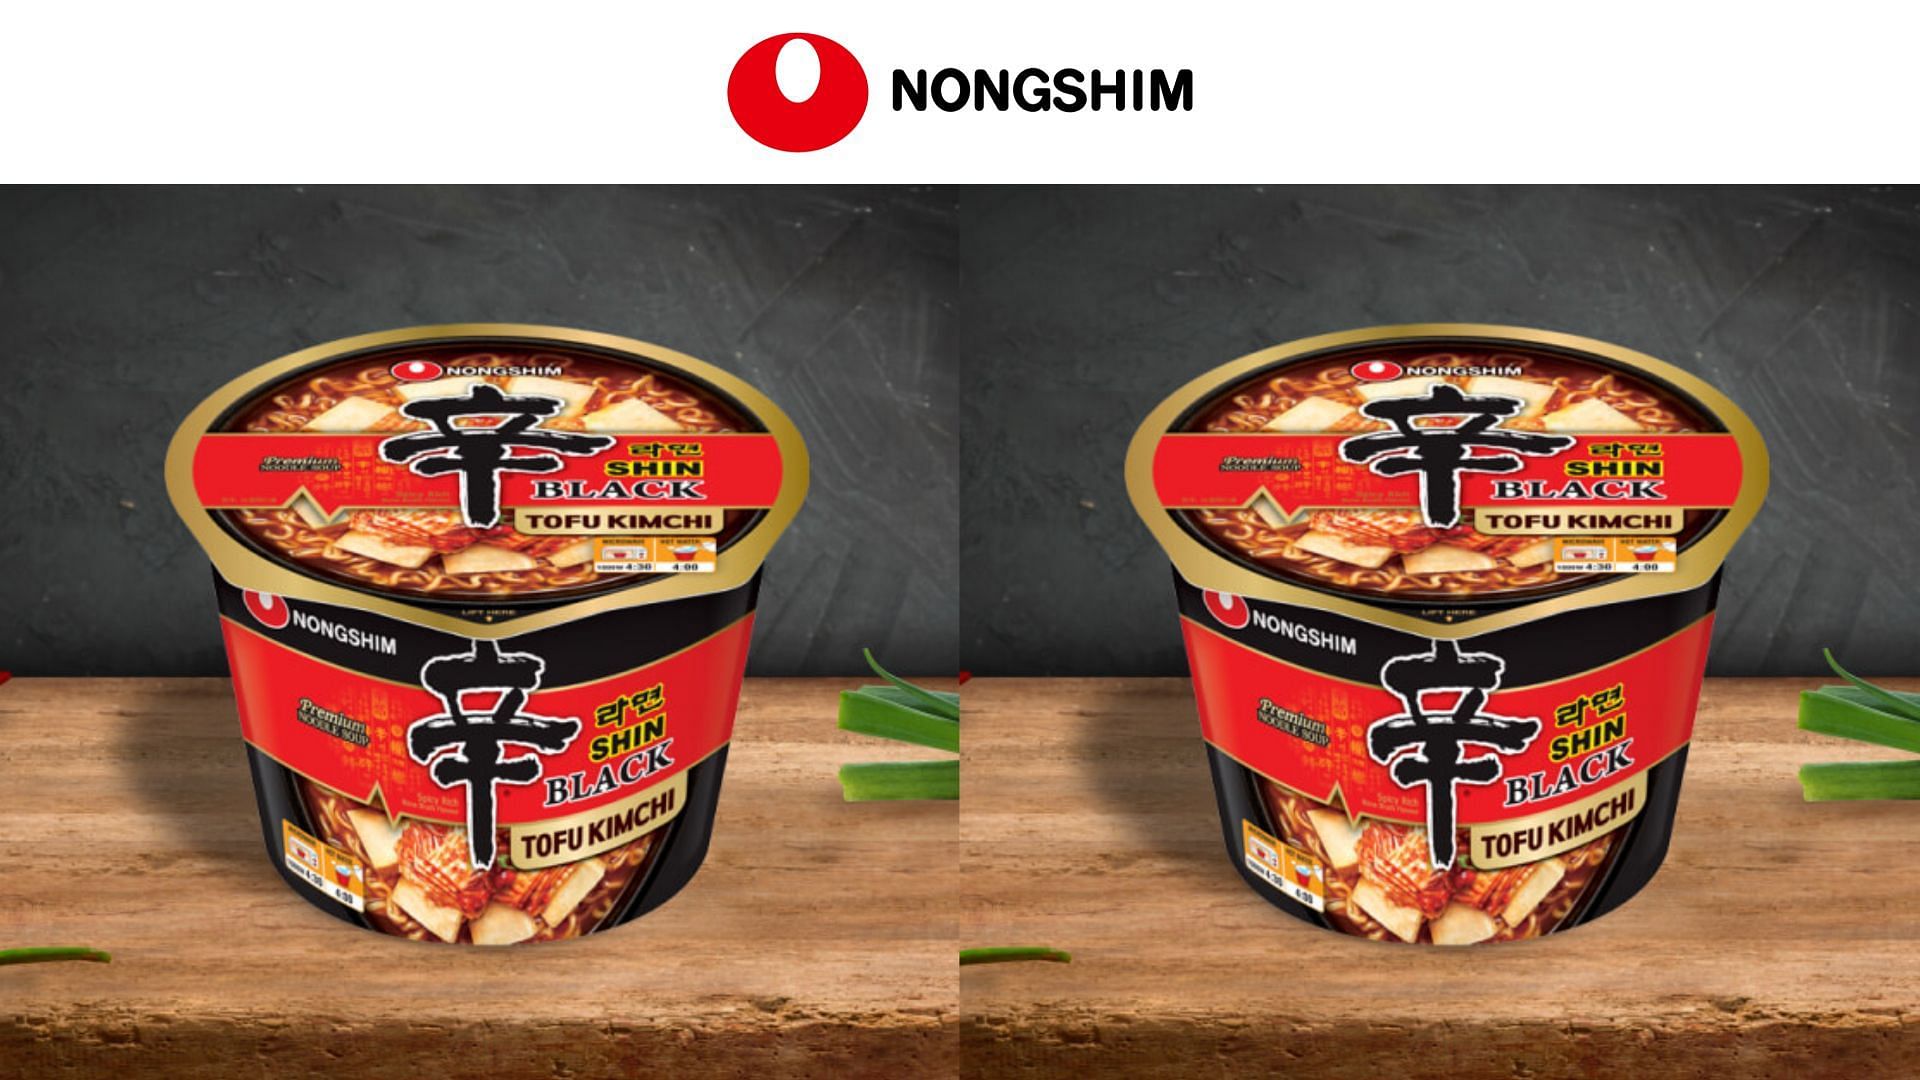 Nongshim ramen recall Products under scrutiny over cancercausing chemical